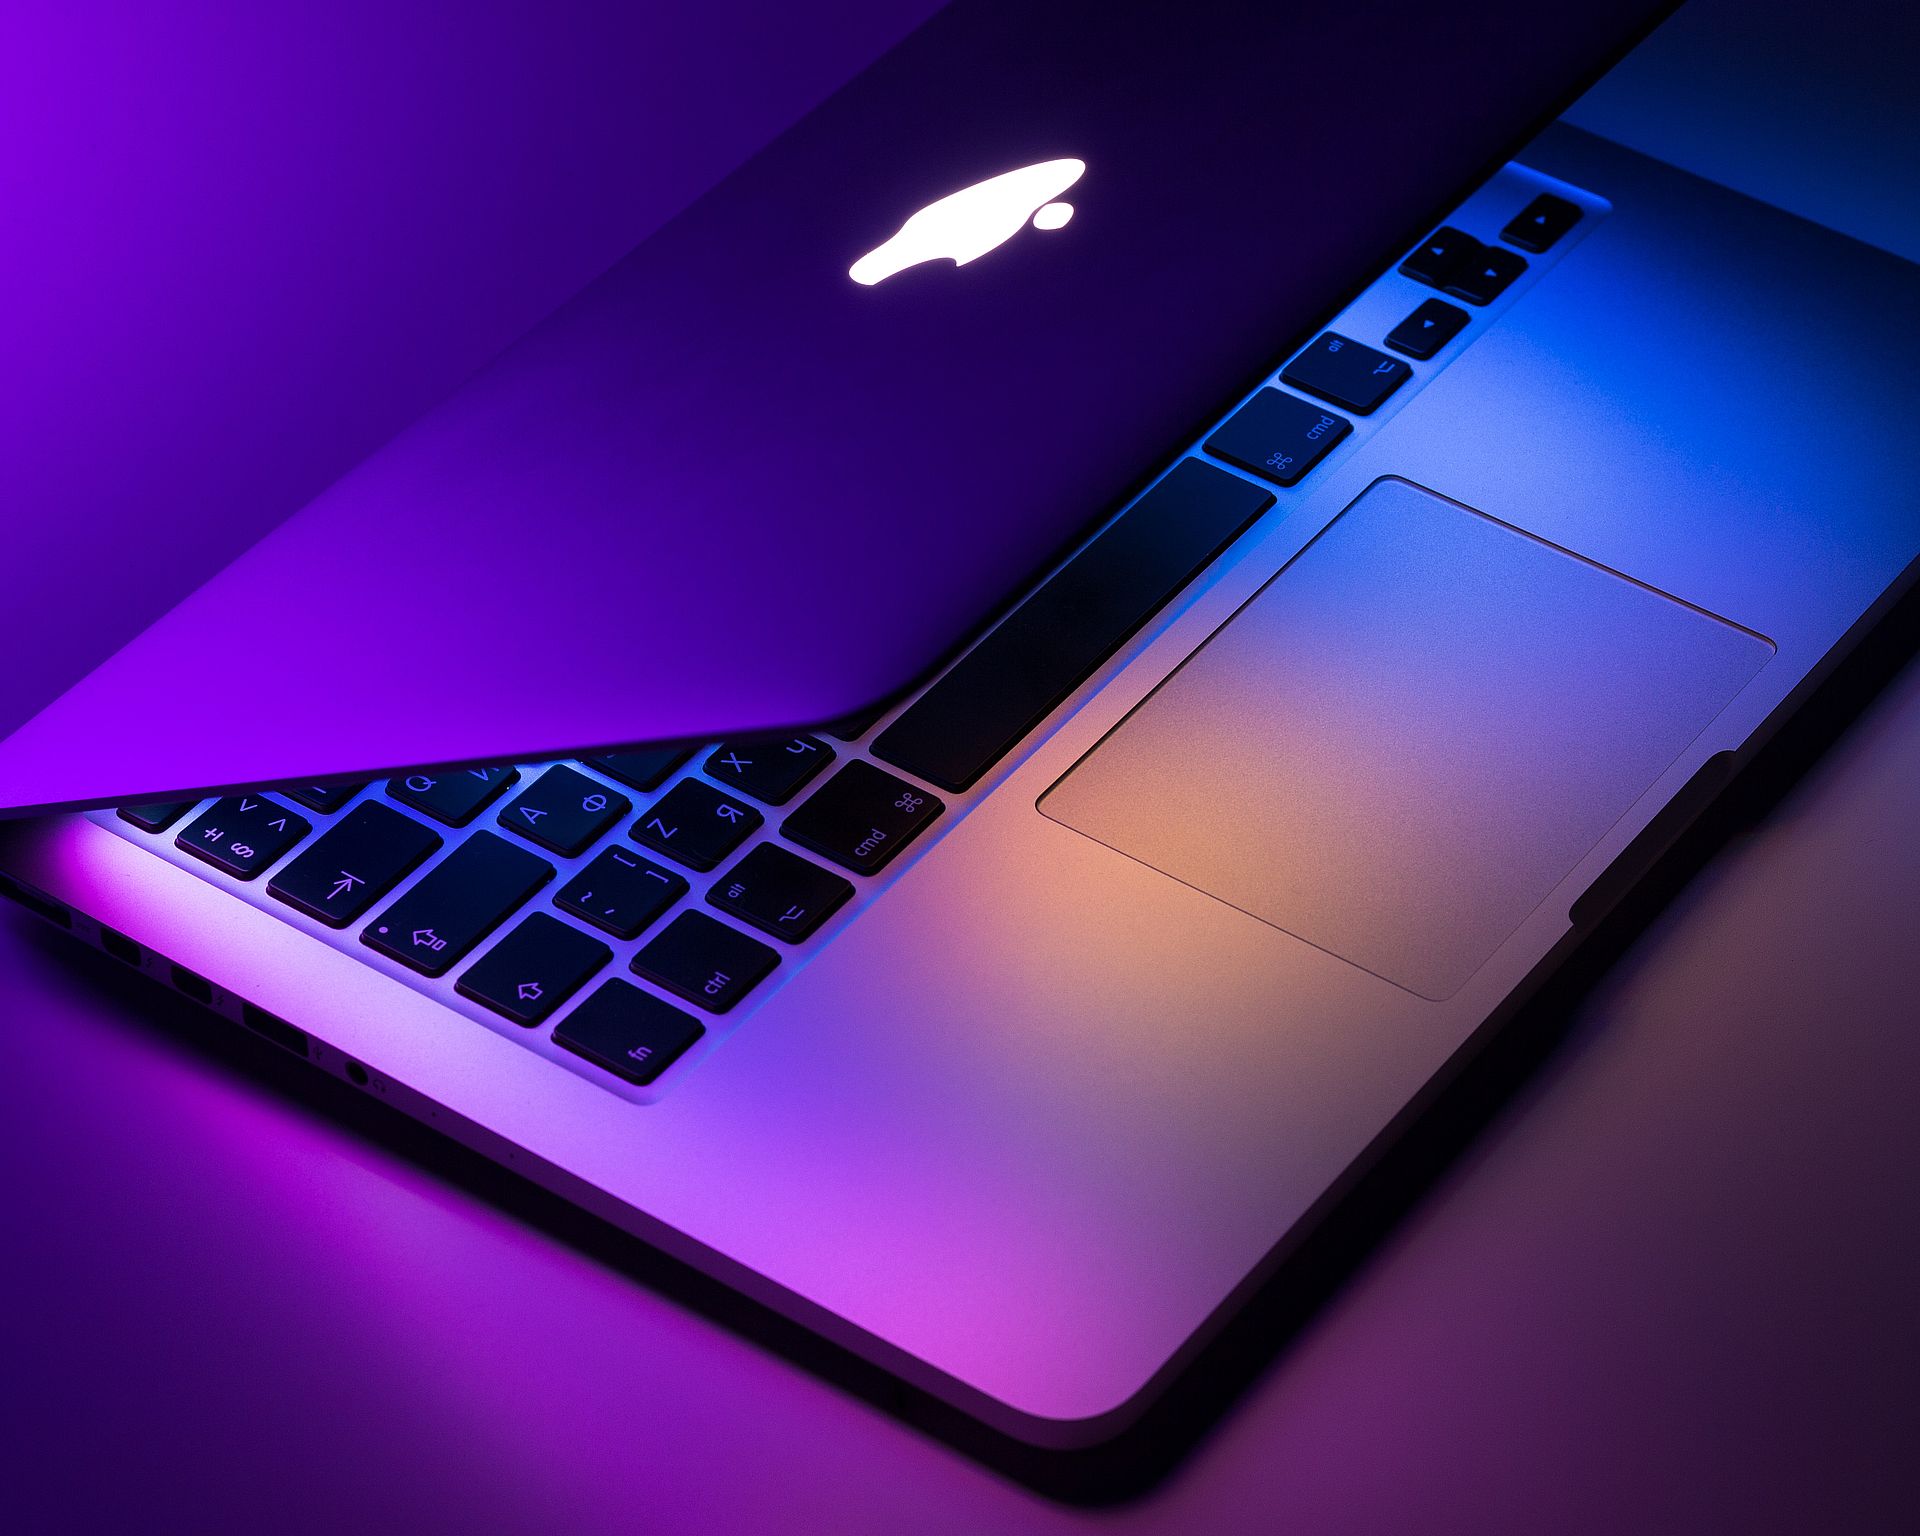 Mac users beware! Delete these malware-infected apps now